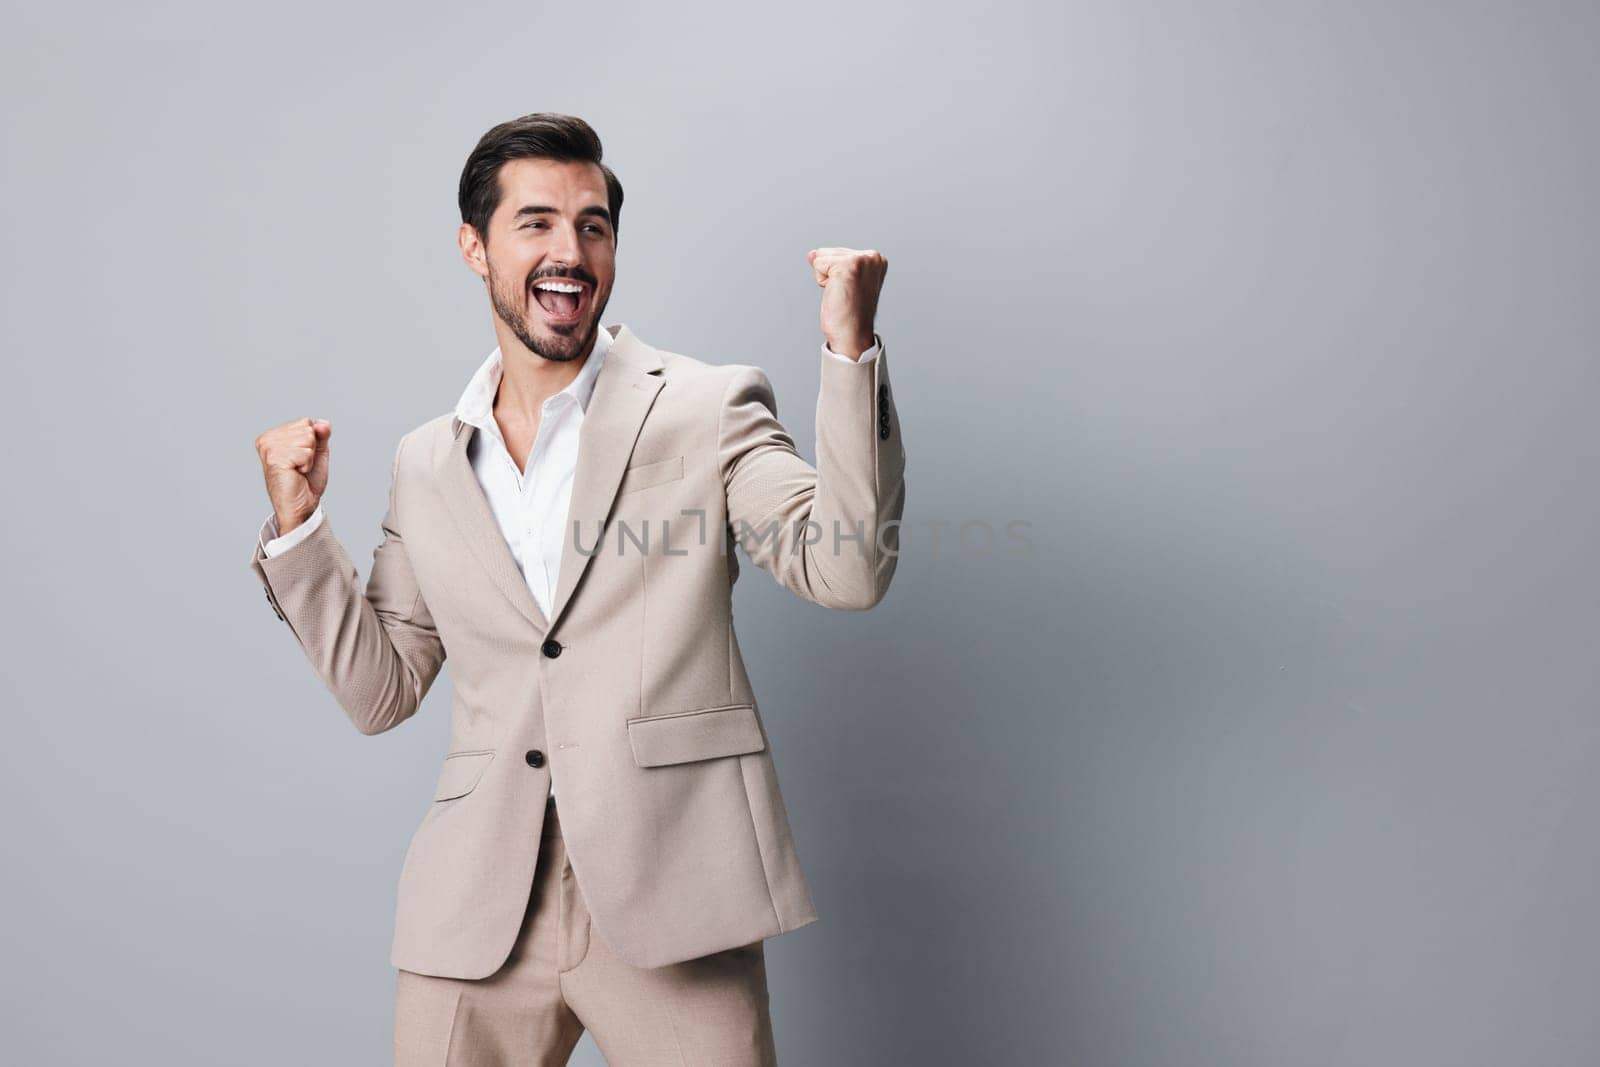 person man victory businessman happy arm portrait background model suit business winner beige smile up celebrate occupation isolated sexy posing hand